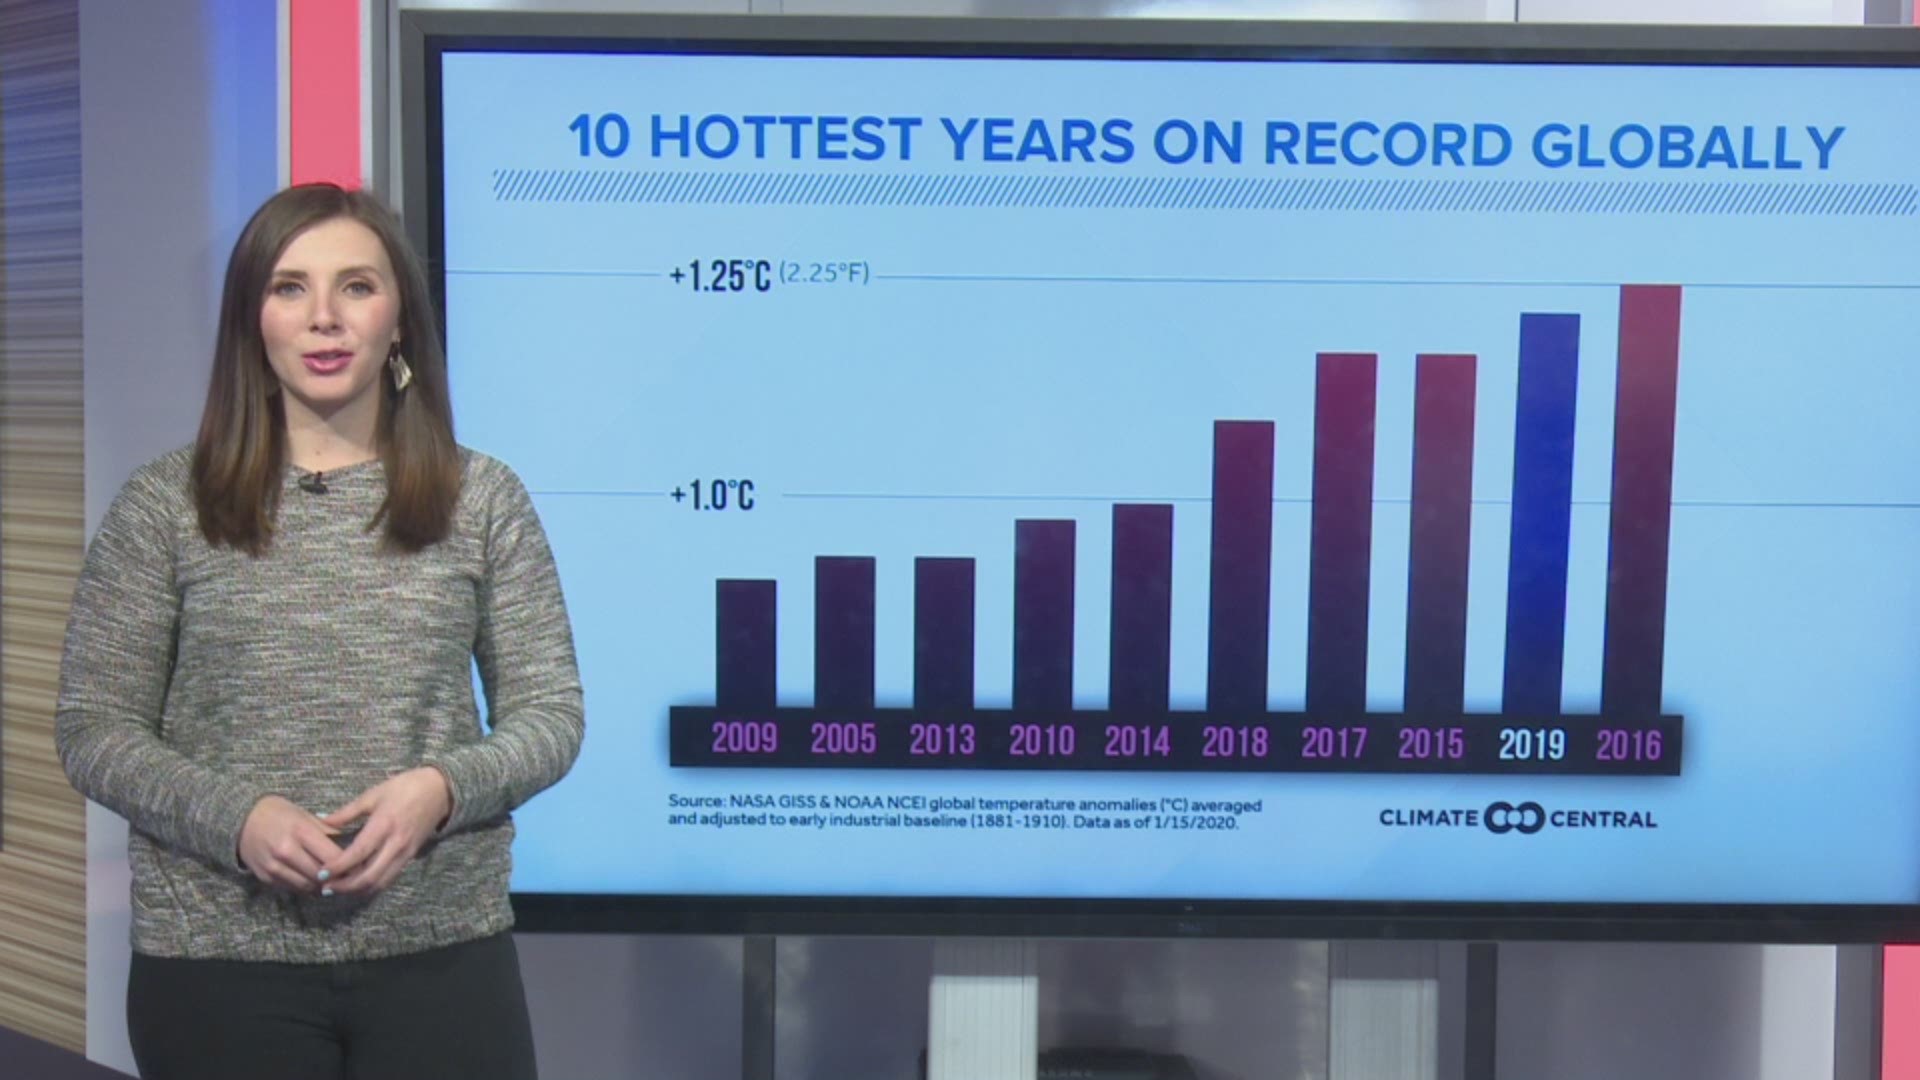 2019 was the second hottest year on record here in South Carolina and across the Earth as a whole. Here's a look at the numbers from NOAA and NASA.